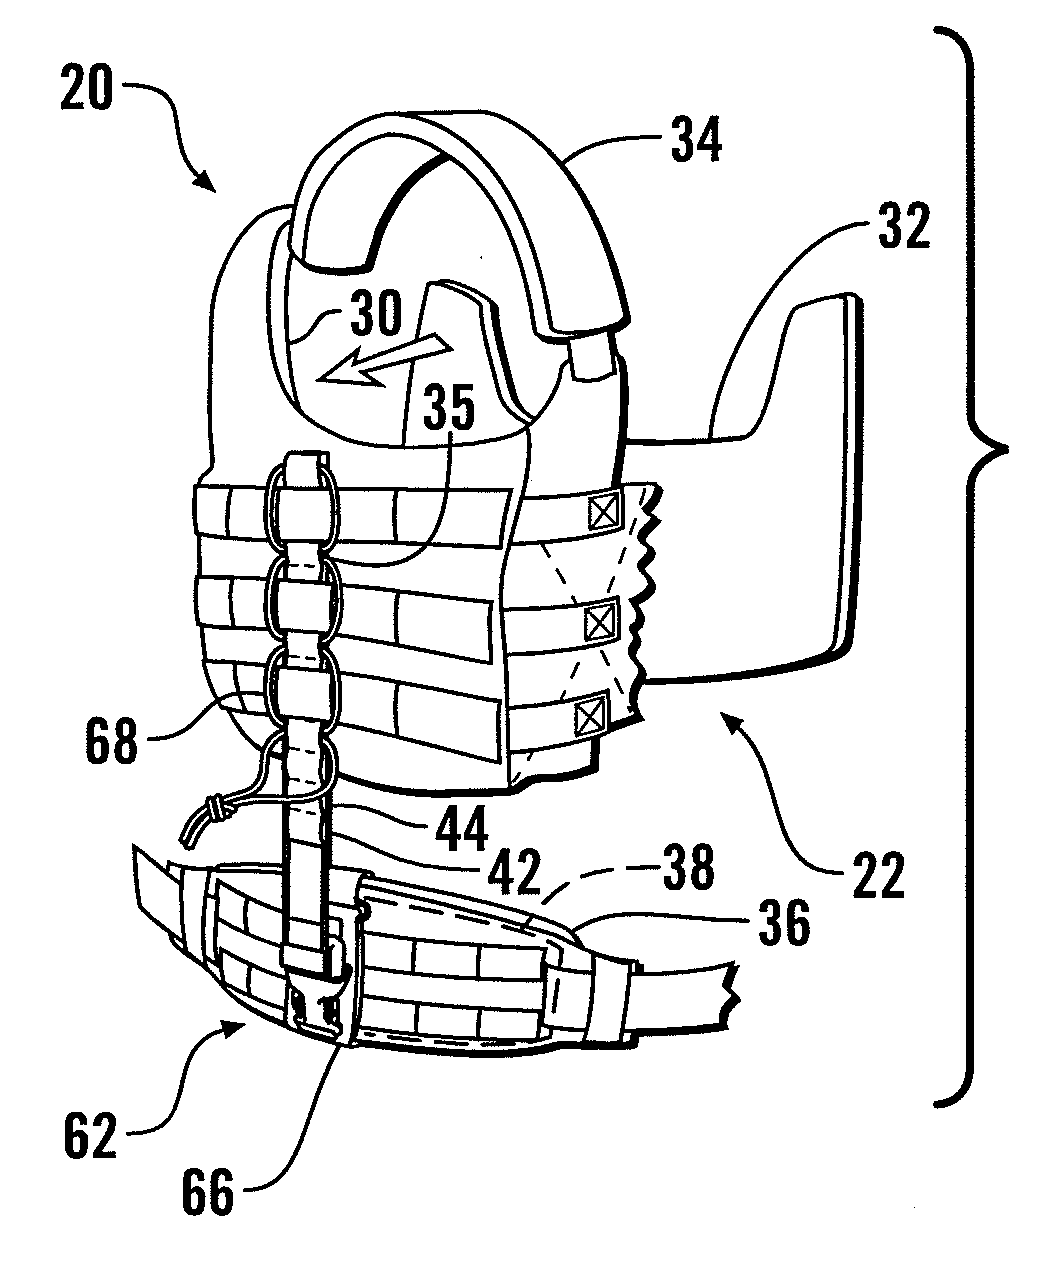 Personal Load Distribution Device